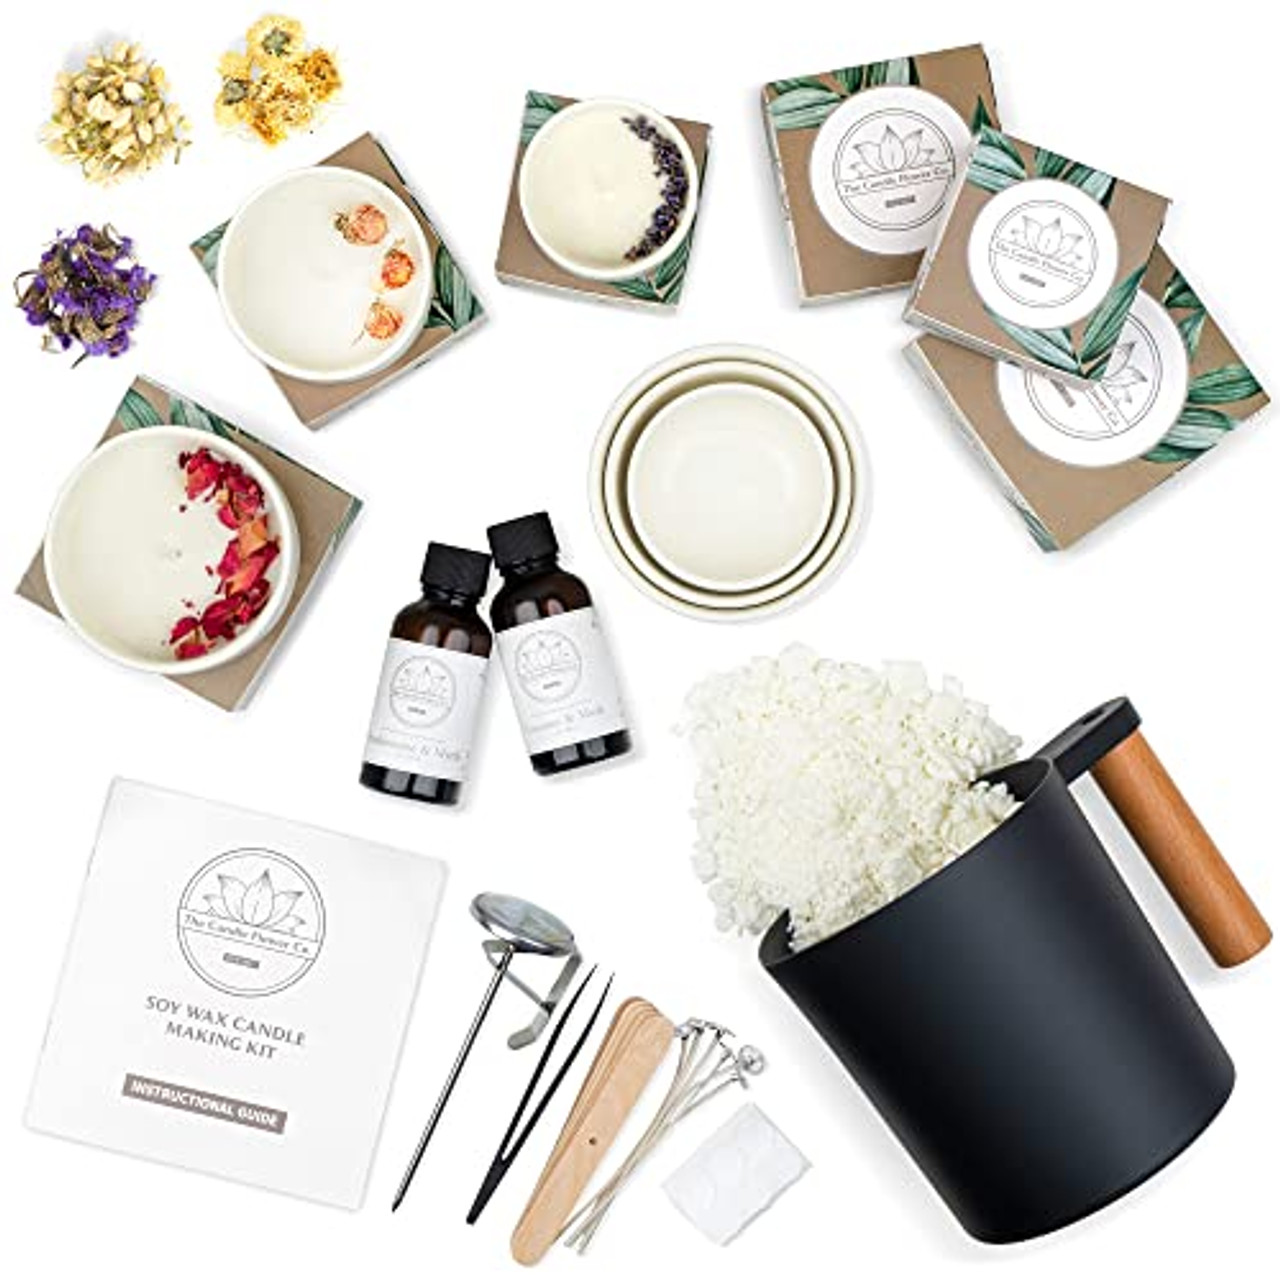 Pavlova Smash- Luxury Candle Making Kit, Make 6 Candles with Natural Soy  Wax A-Z Candle Making Set, Ceramic Cups, Dried Flowers, Gift Packing for  Each Candle, 2 Fragrances - Arts and Crafts DIY Kit